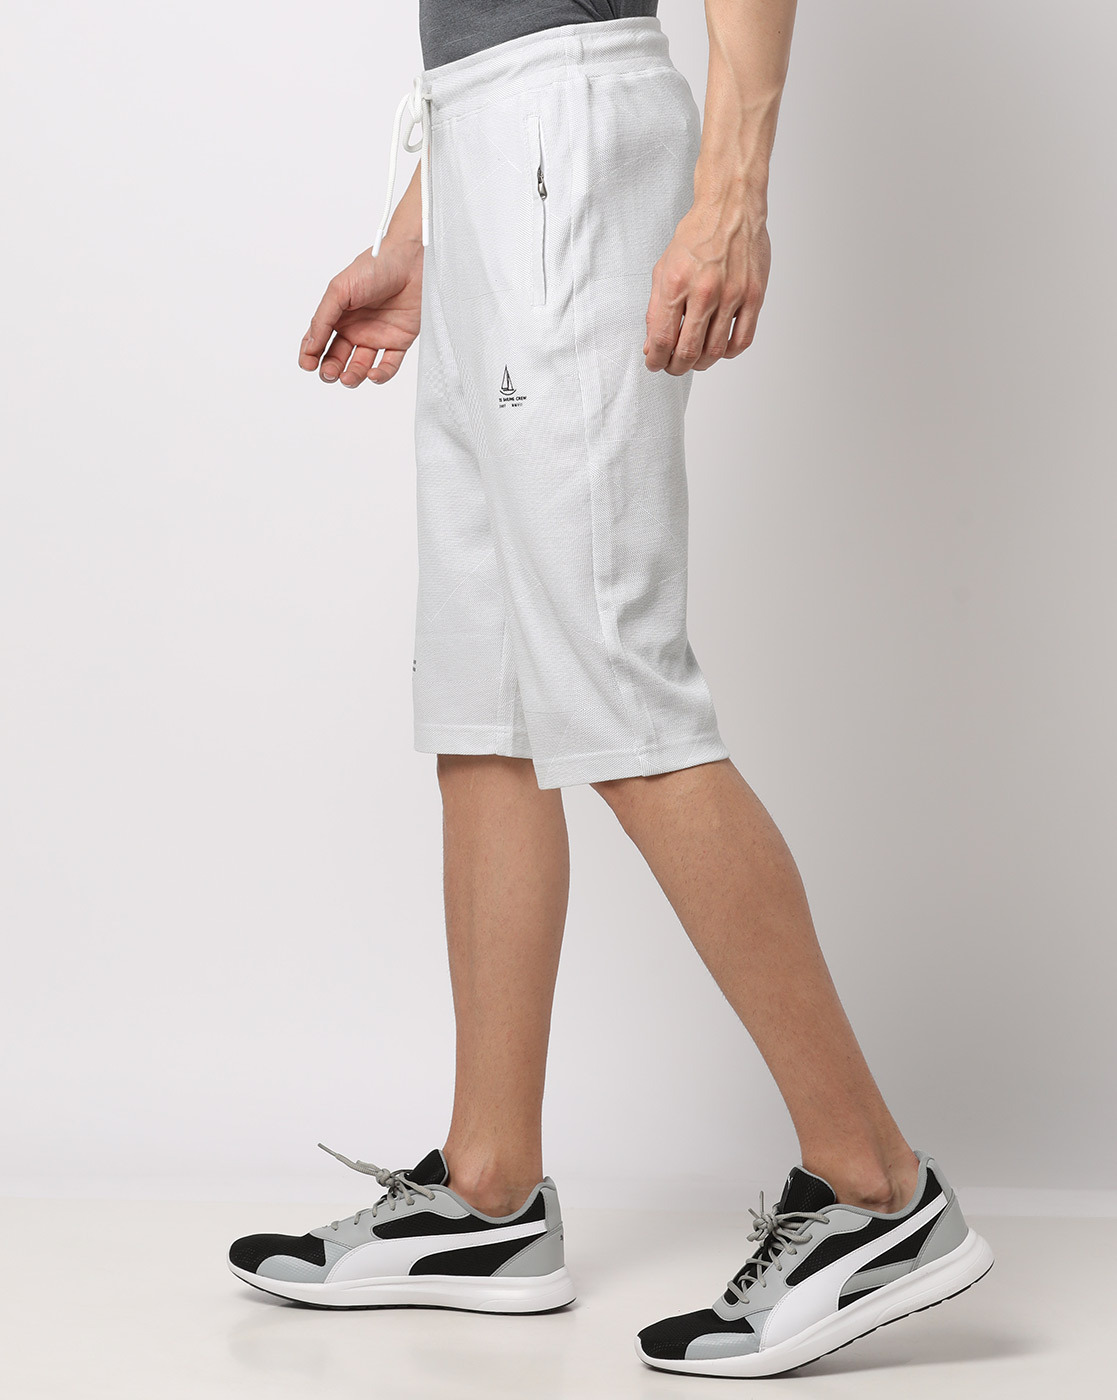 MENS CARGO 3/4 PANTS : Amazon.in: Clothing & Accessories